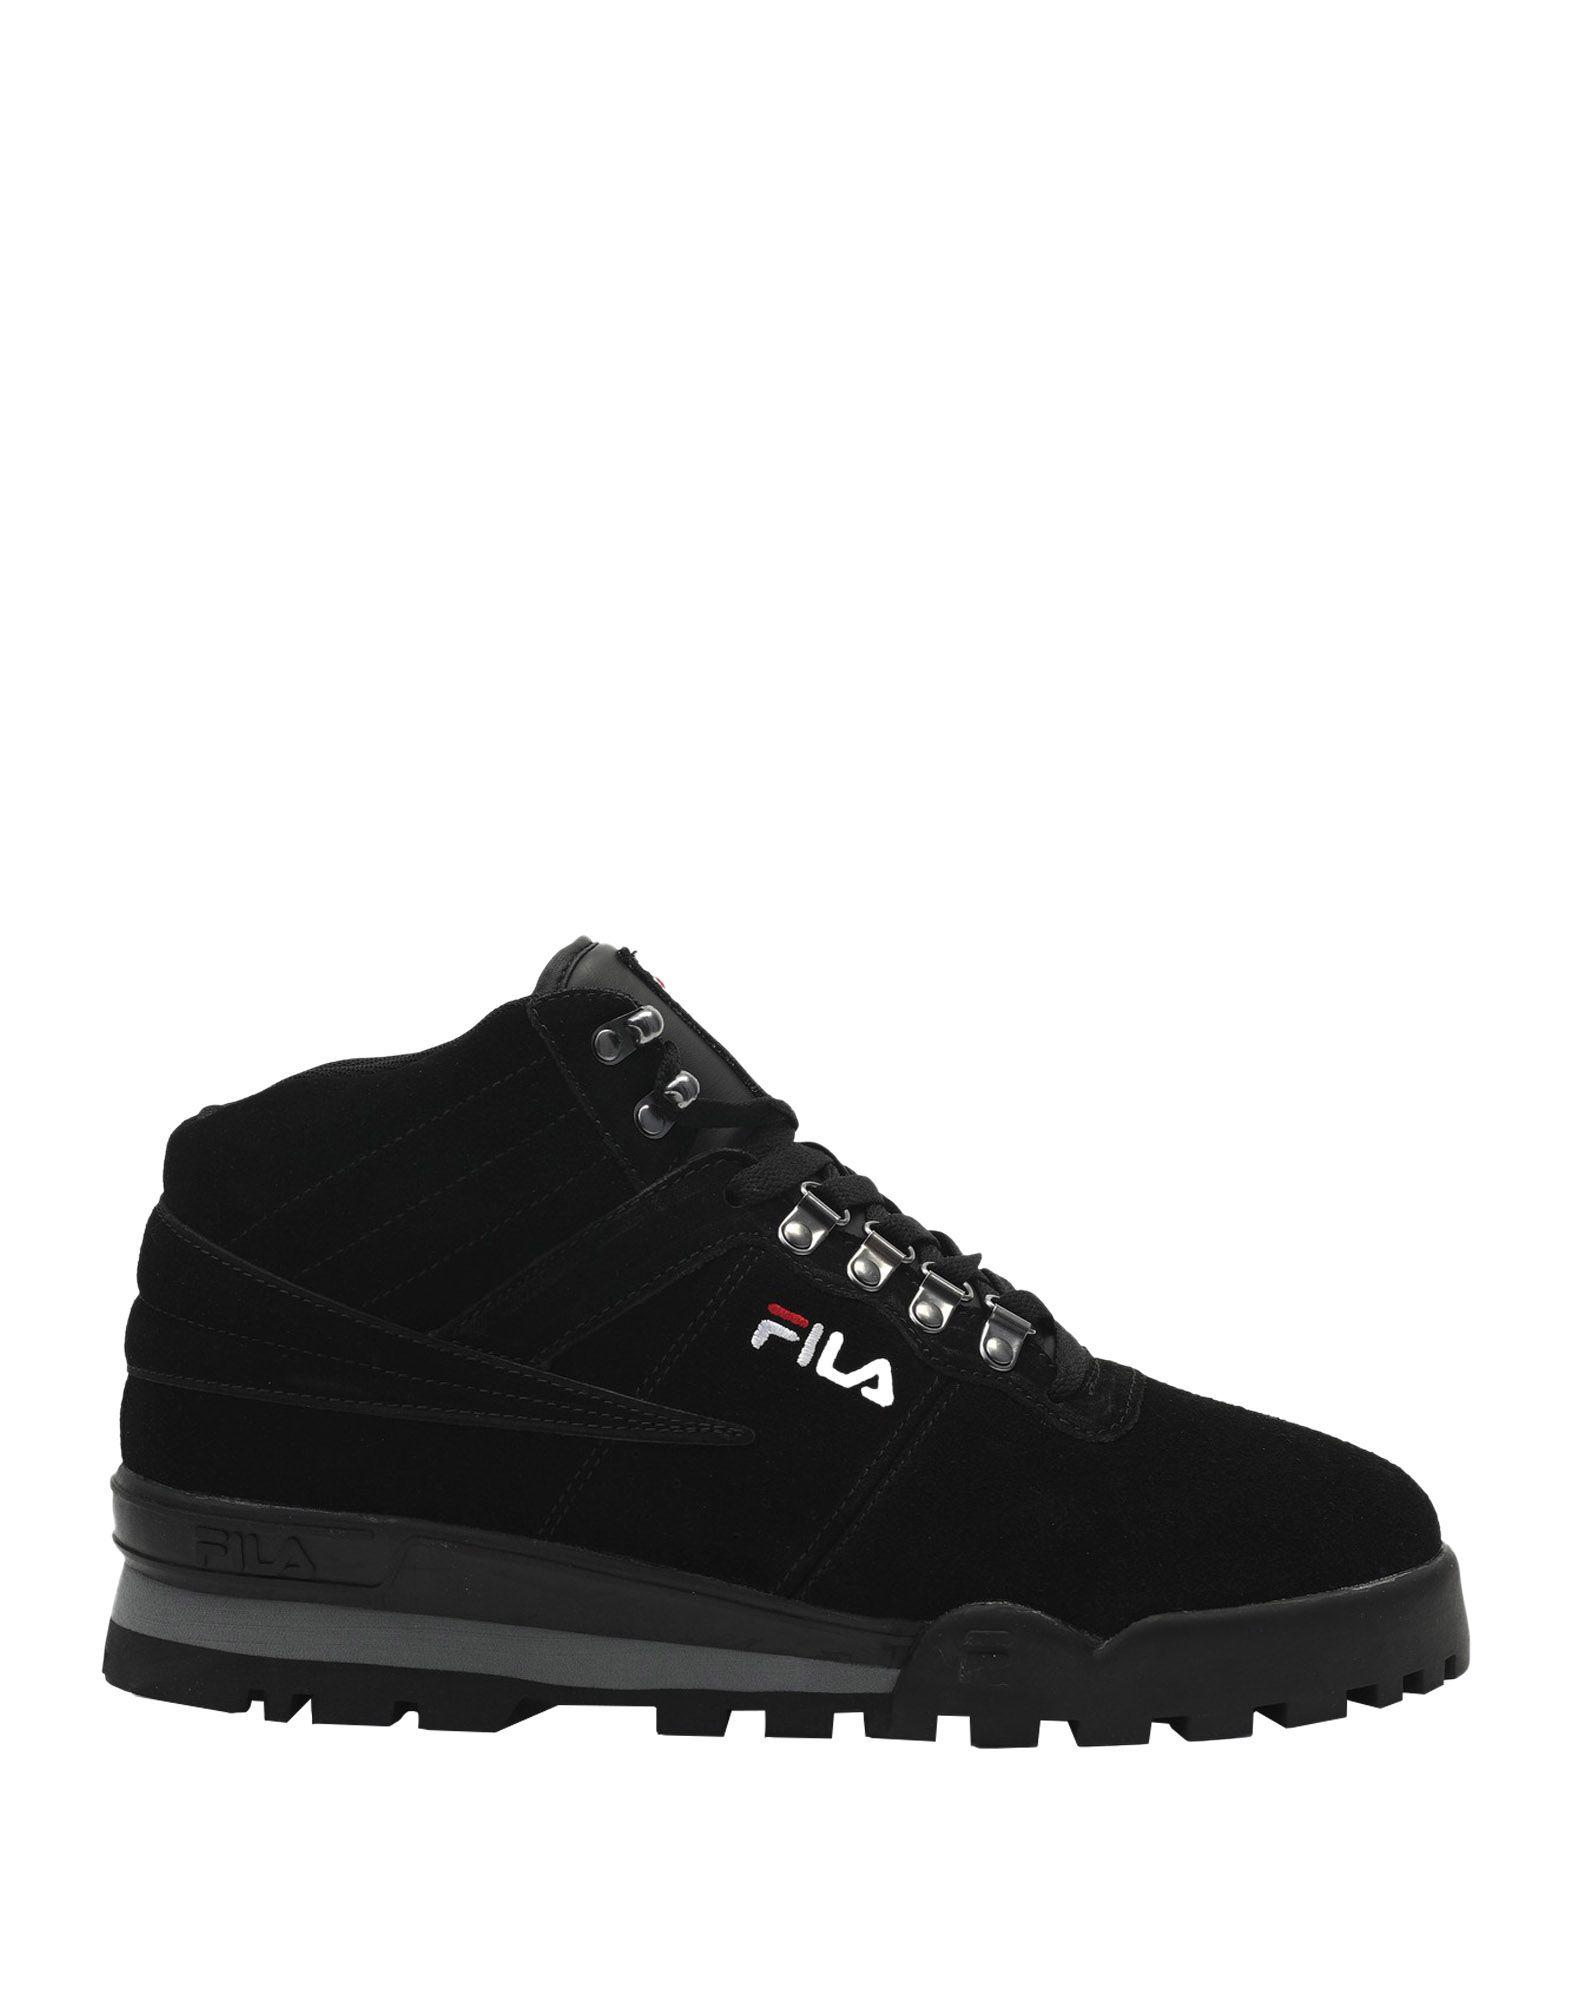 Fila Suede High-tops & Sneakers in Black for Men - Save 11% - Lyst